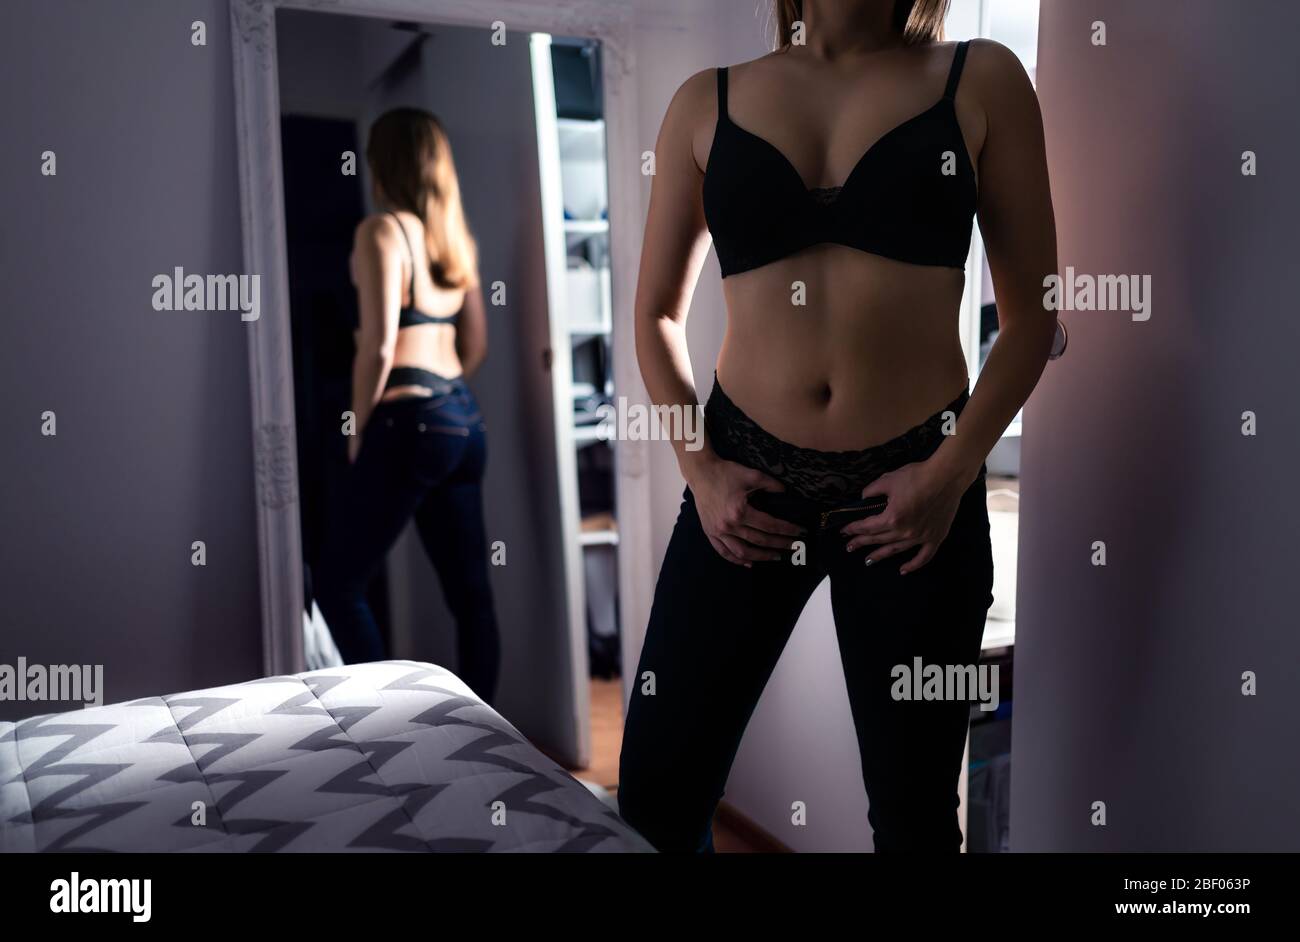 Seductive woman in underwear. Sexy fashion model in black bra and lingerie. Erotic girl in home bedroom at night in dark. Elegant lifestyle. Stock Photo